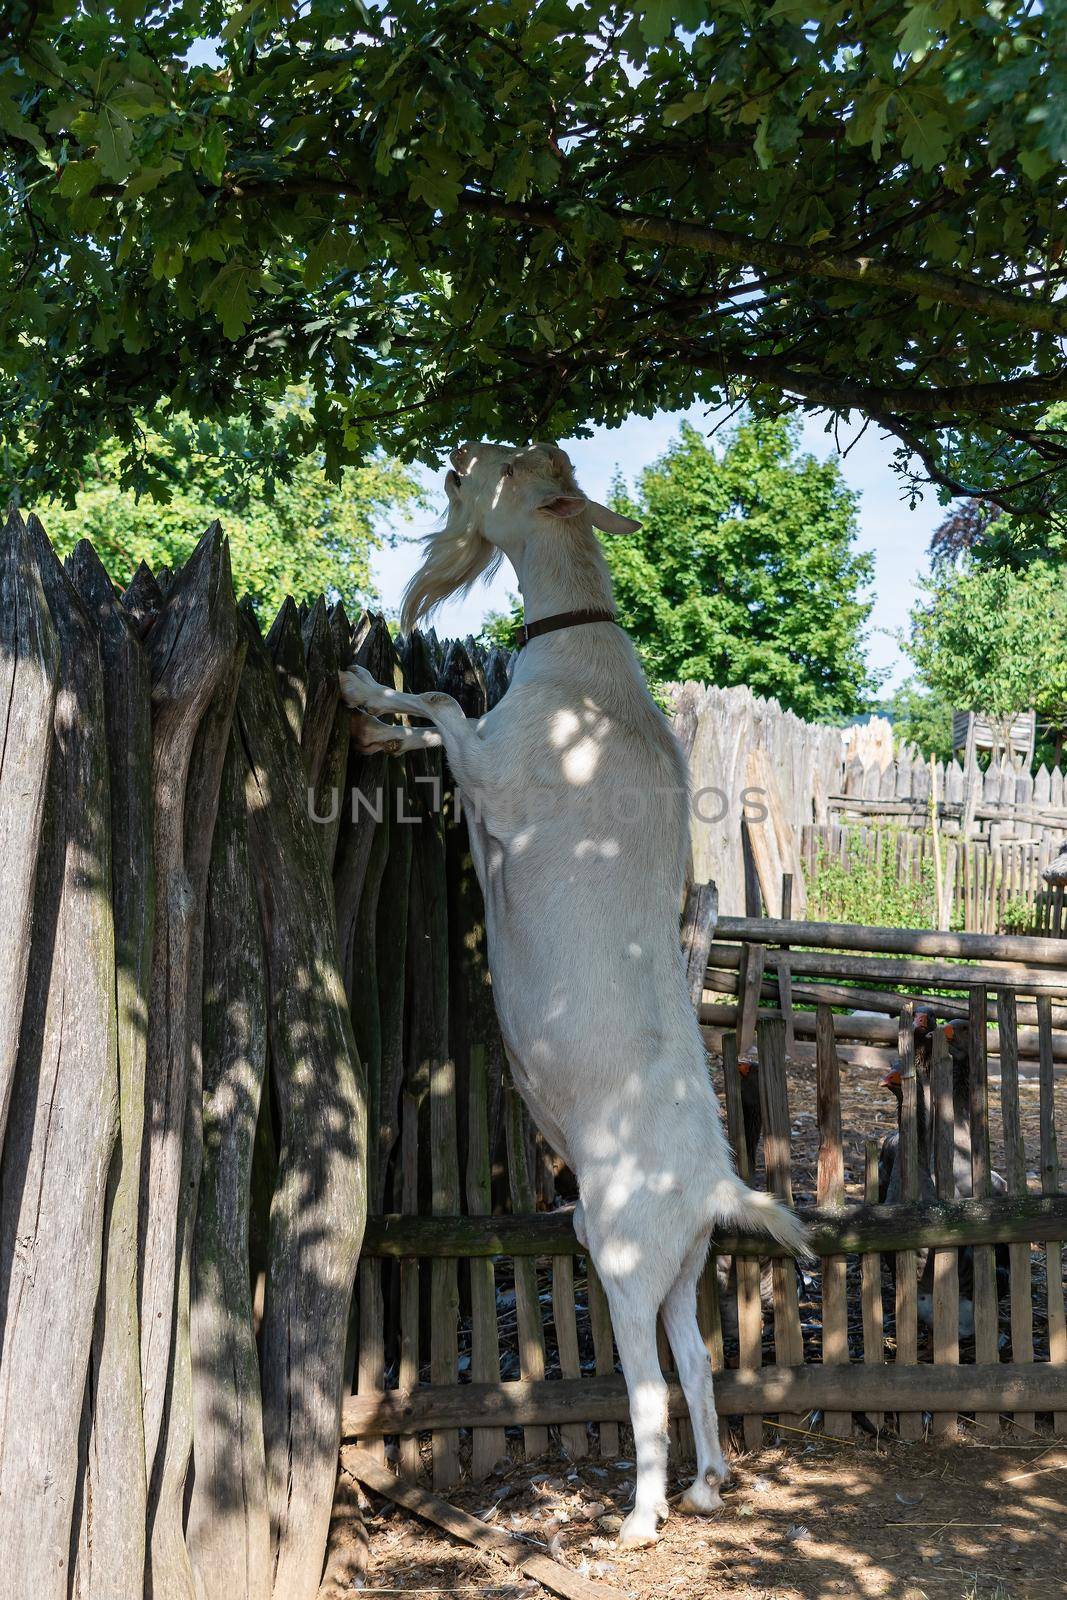 Example of agriculture in the Modra open-air museum. A goat leaning against a fence grazes on a tree branch